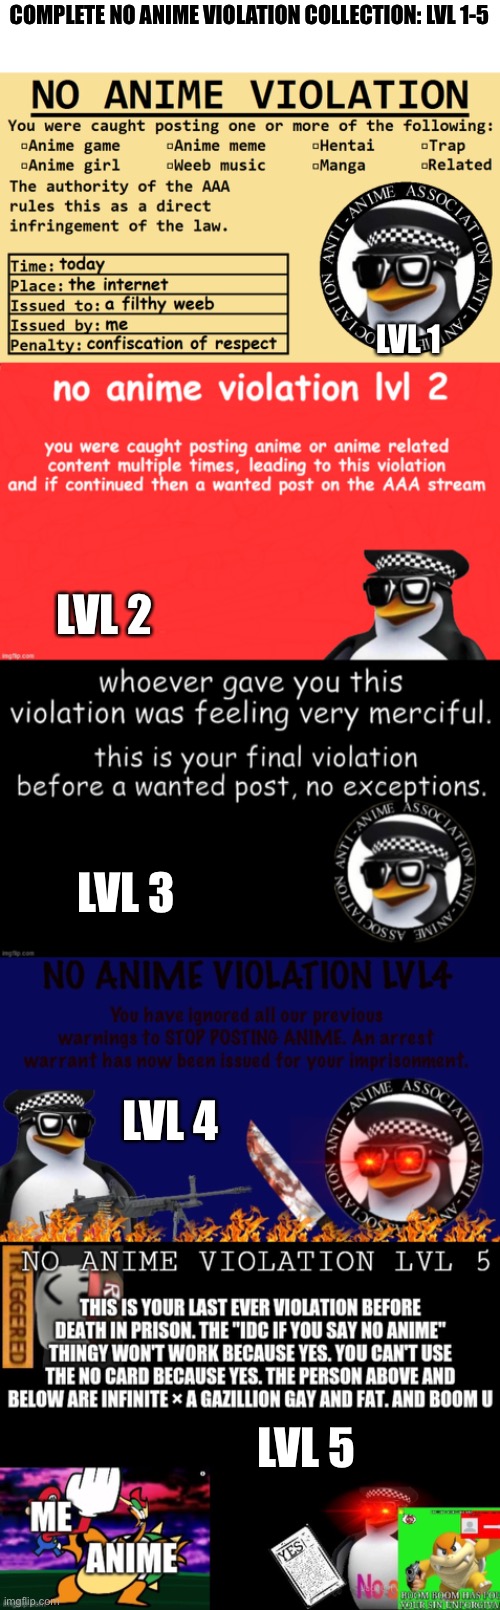 Template links in comments | COMPLETE NO ANIME VIOLATION COLLECTION: LVL 1-5; LVL 1; LVL 2; LVL 3; LVL 4; LVL 5 | image tagged in no anime,no anime violation lvl 2,no anime violation lvl 3,no anime violation lvl 4,no anime violation lvl 5 | made w/ Imgflip meme maker